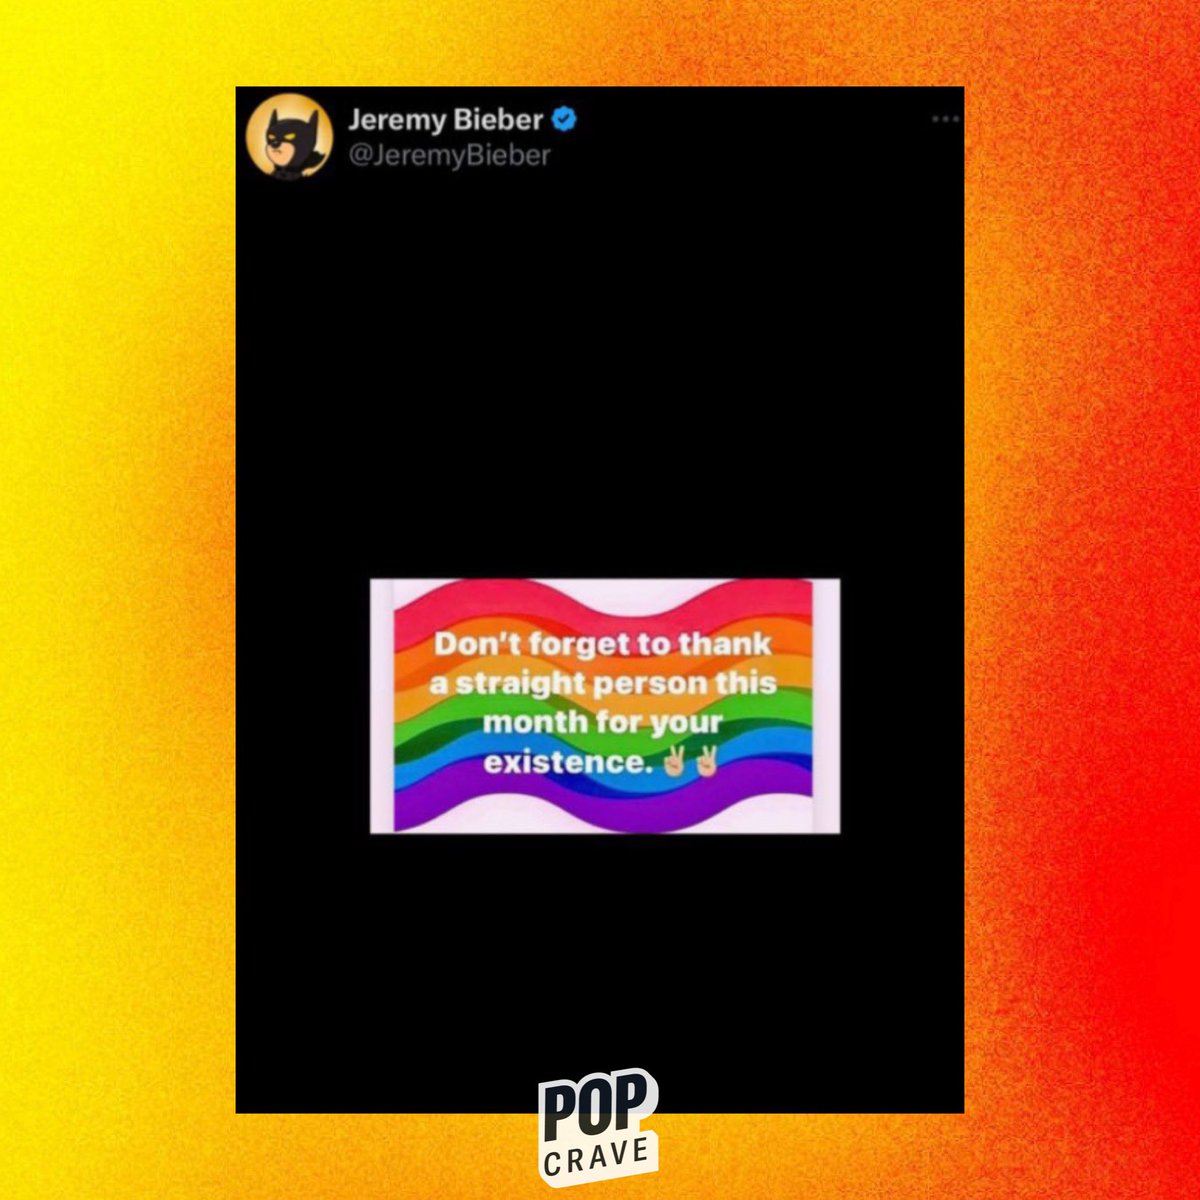 Justin Bieber's dad, Jeremy, posts offensive LGBTQ message:

“Don't forget to thank a straight person this month for your existence.”